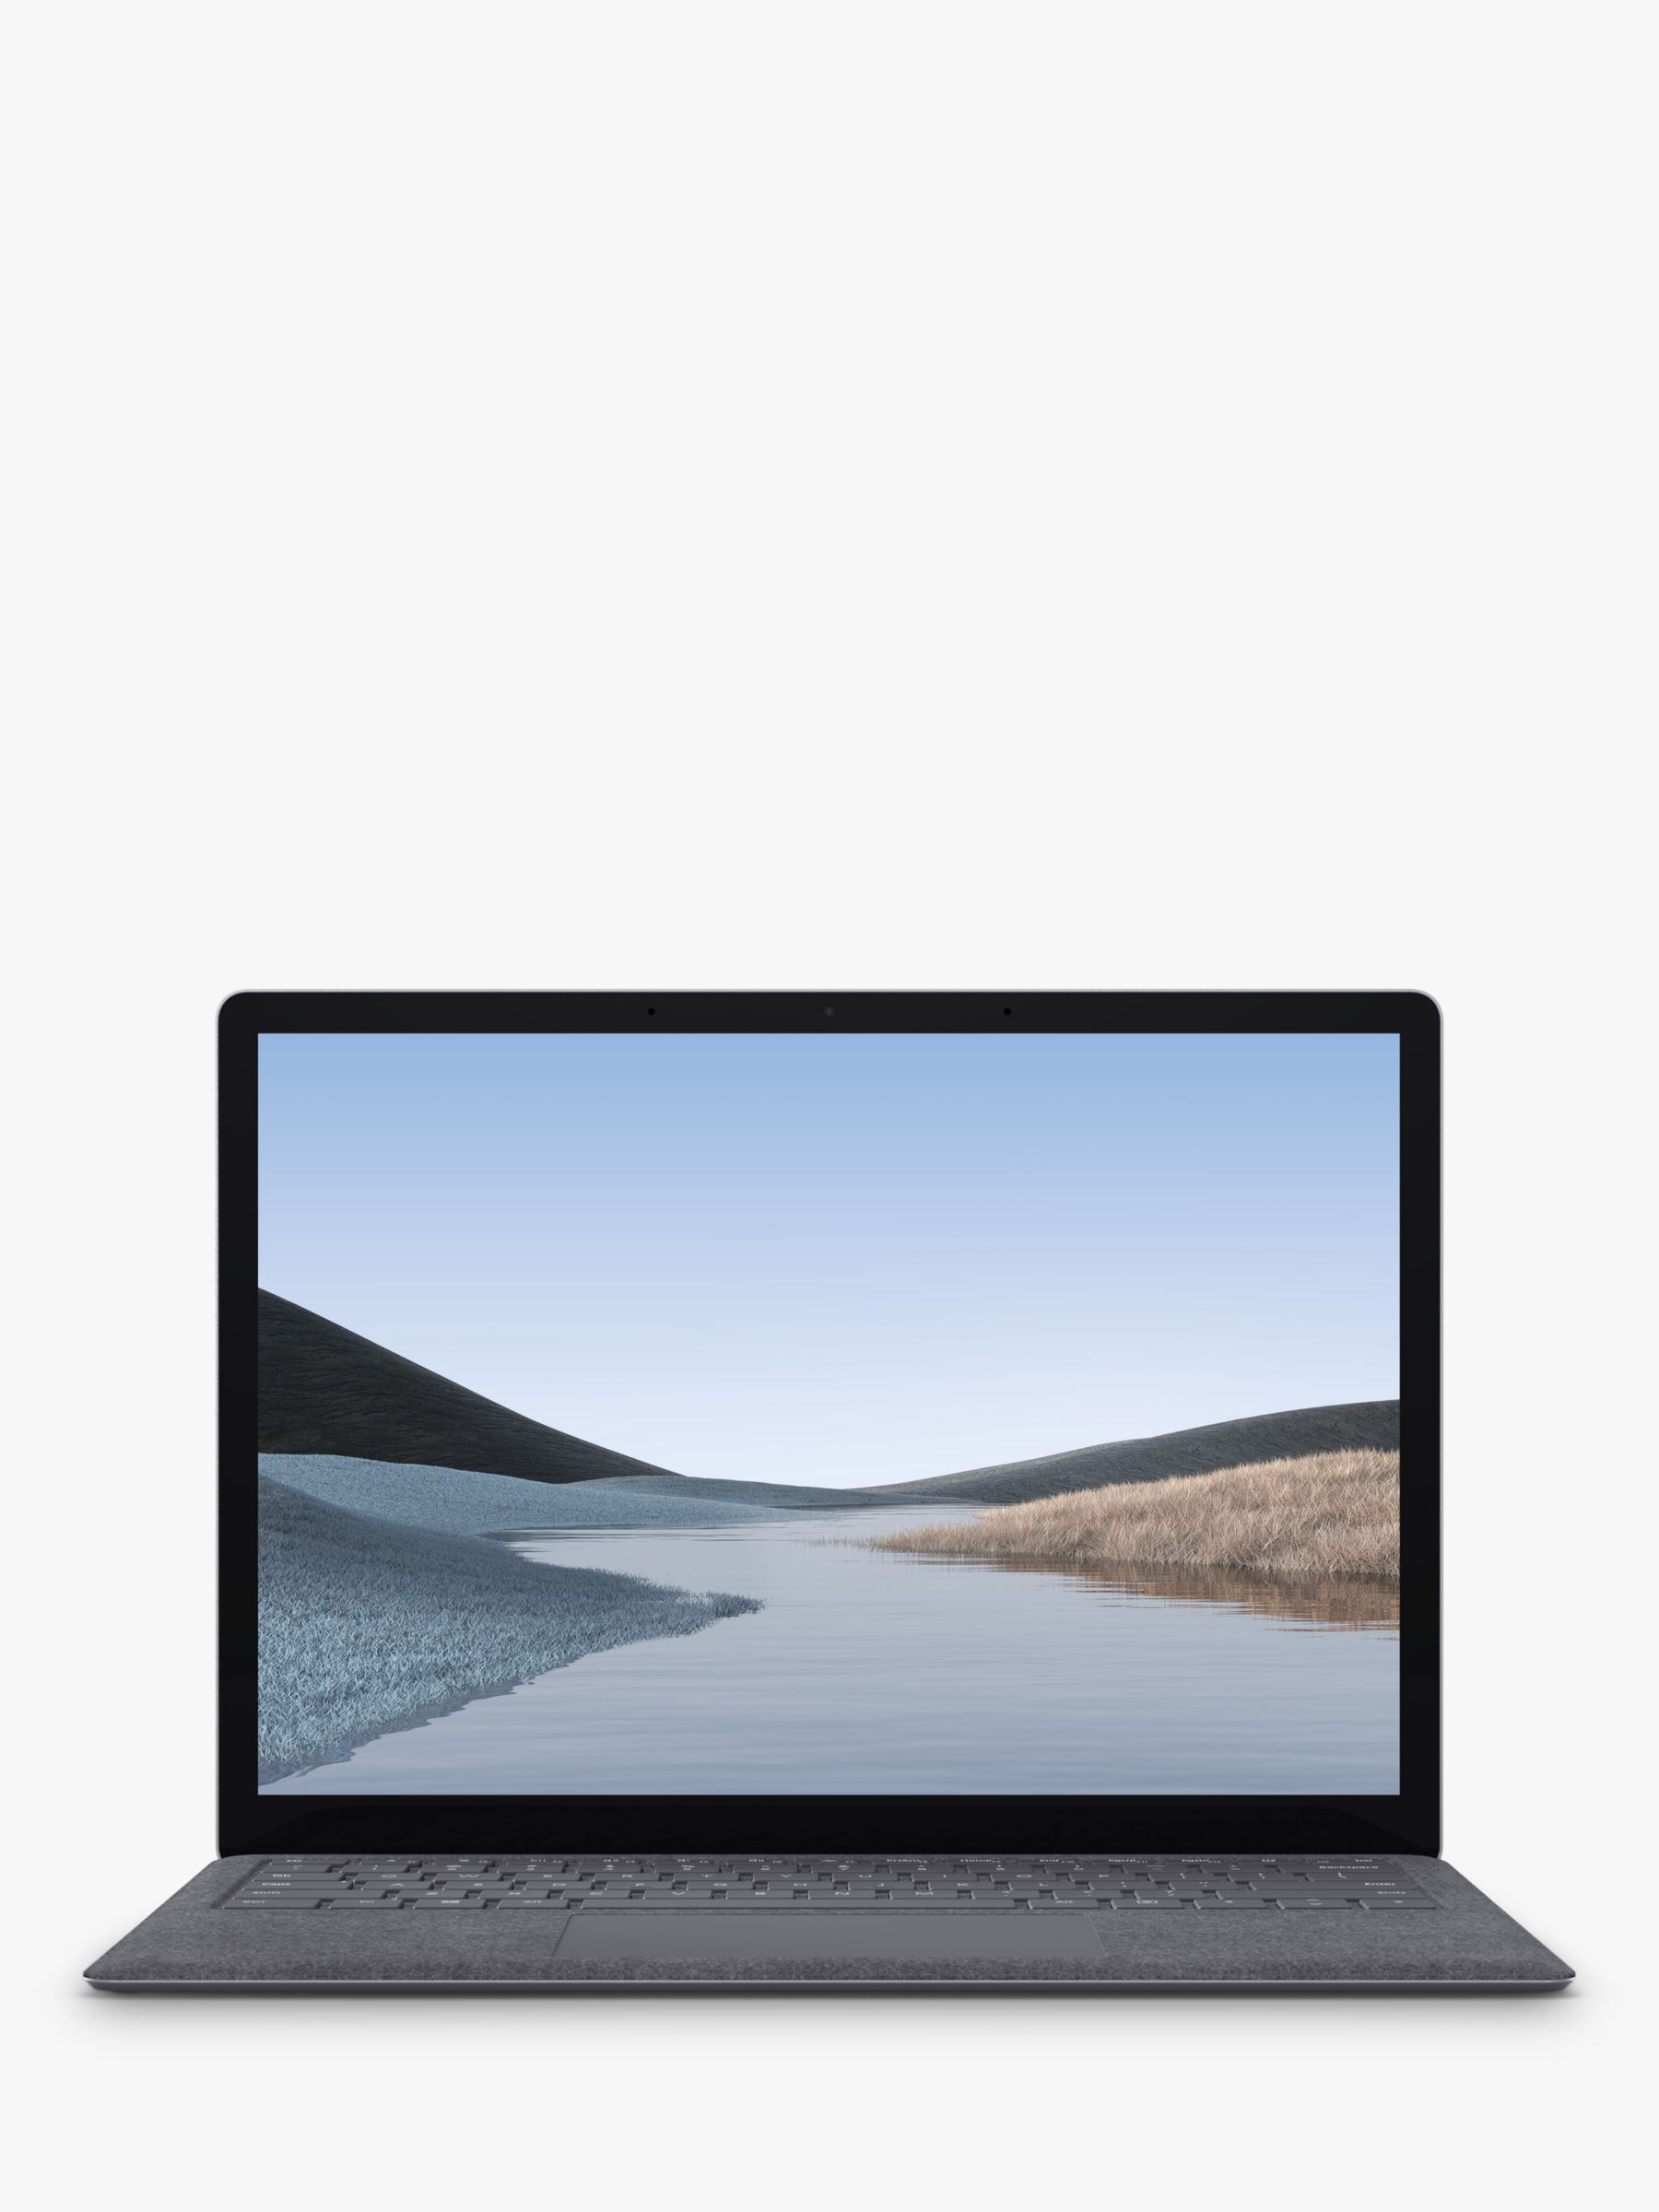 【〜11/11 Office 16GB】Surface Laptop 3 i5